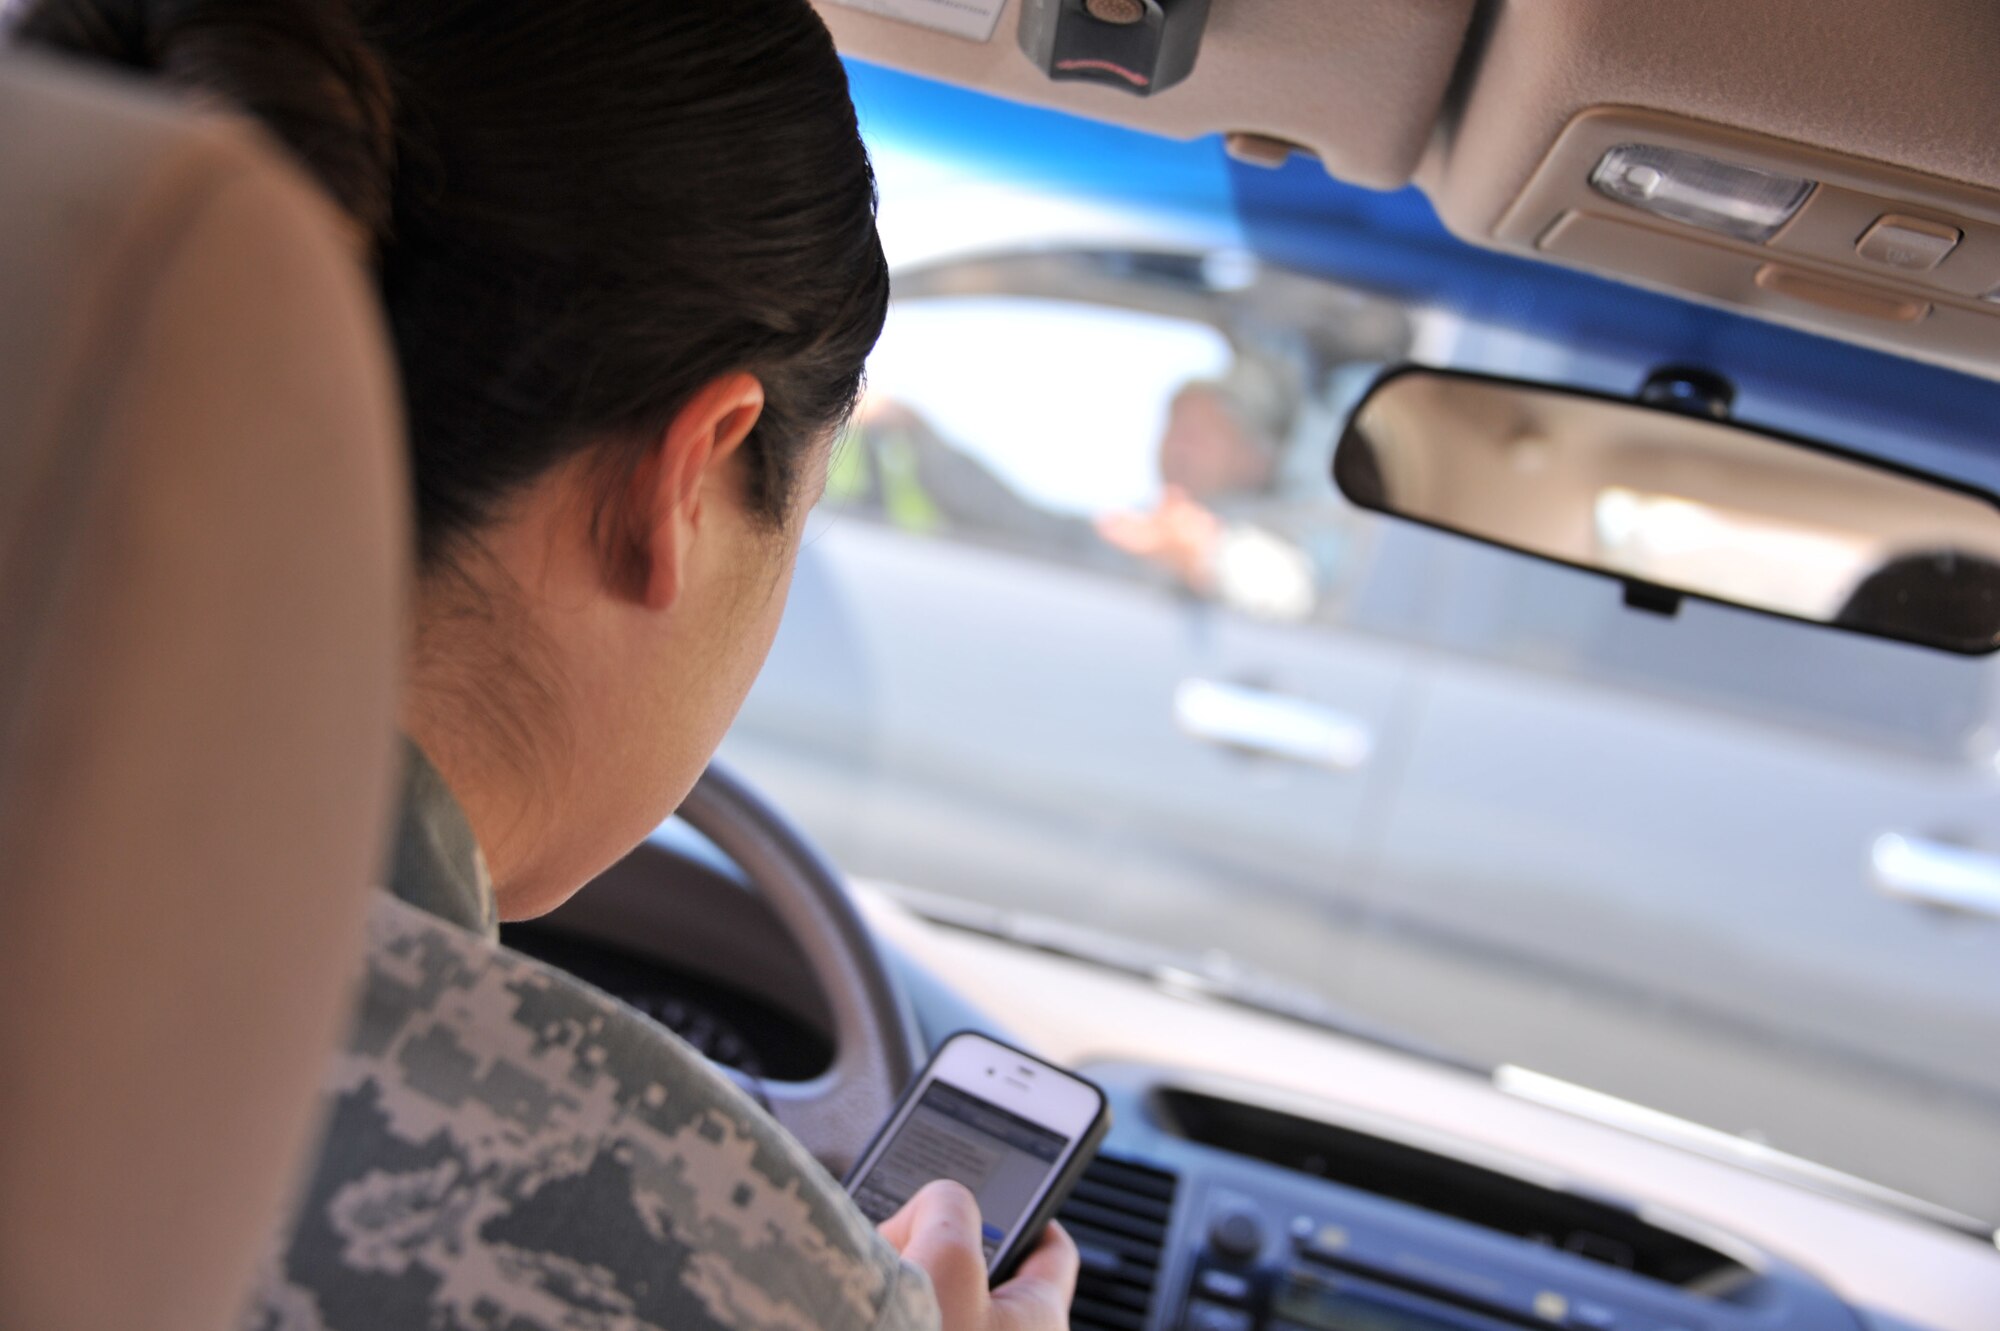 According to the national highway traffic safety administration, sending or receiving a text takes a driver's eyes from the road for an average of 4.6 seconds, the equivalent-at 55 mph-of driving the length of an entire football field, blind. (U.S. Air Force illustration by Airman 1st Class William Blankenship)